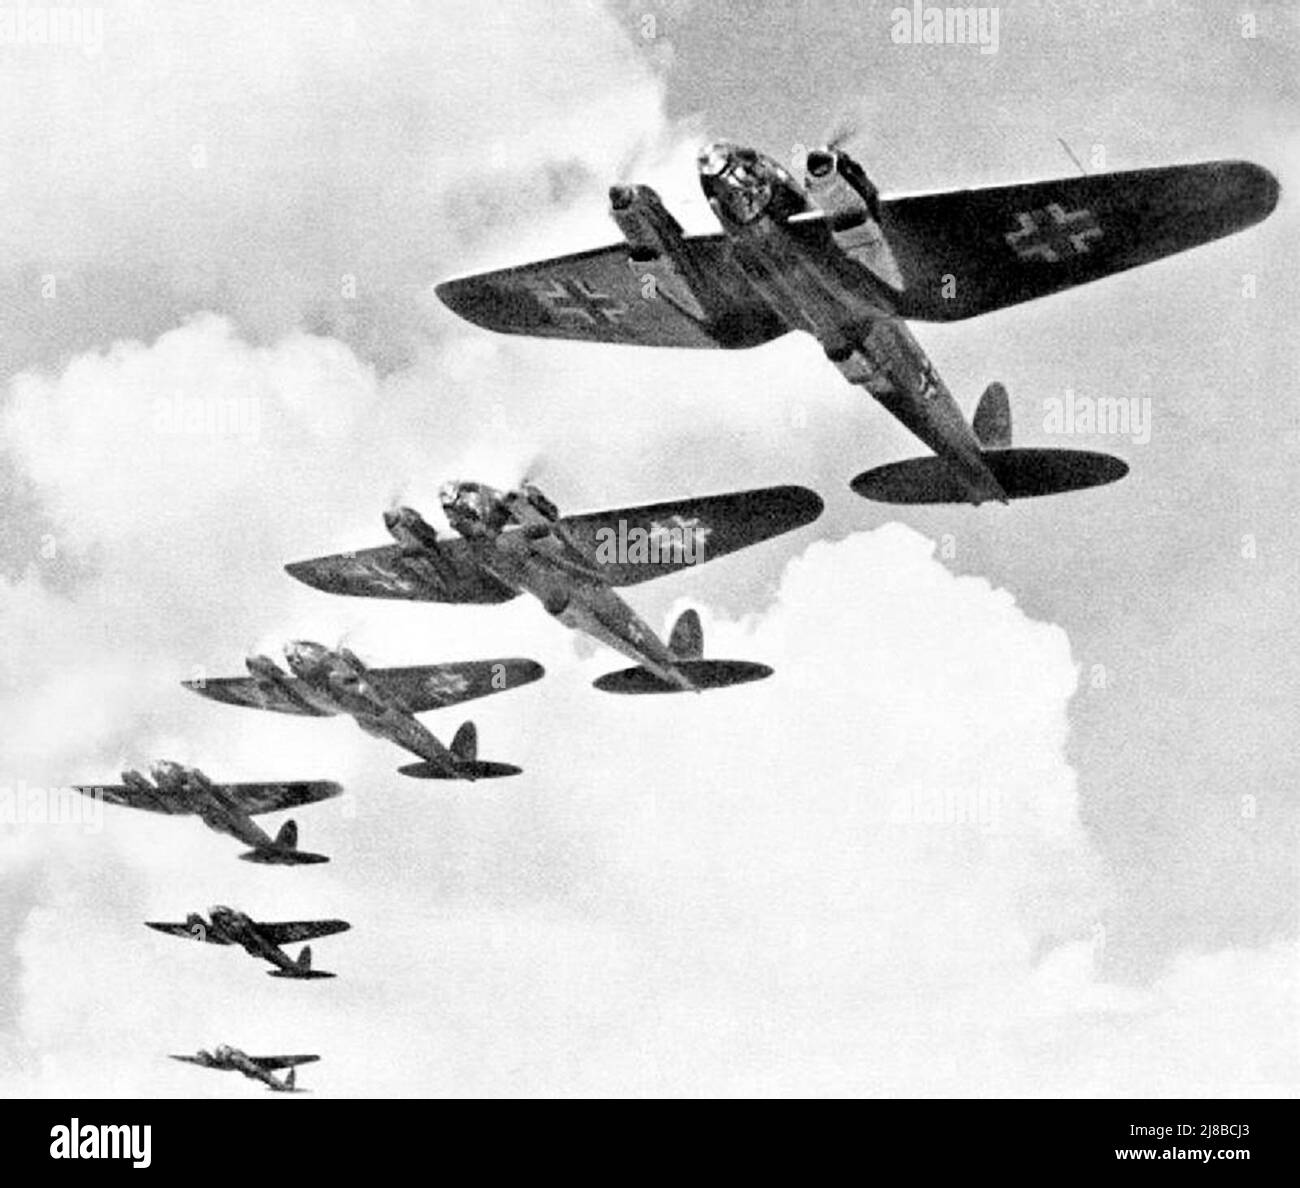 A formation of Heinkel He 111 bombers during the Battle of Britain in World War II. Stock Photo